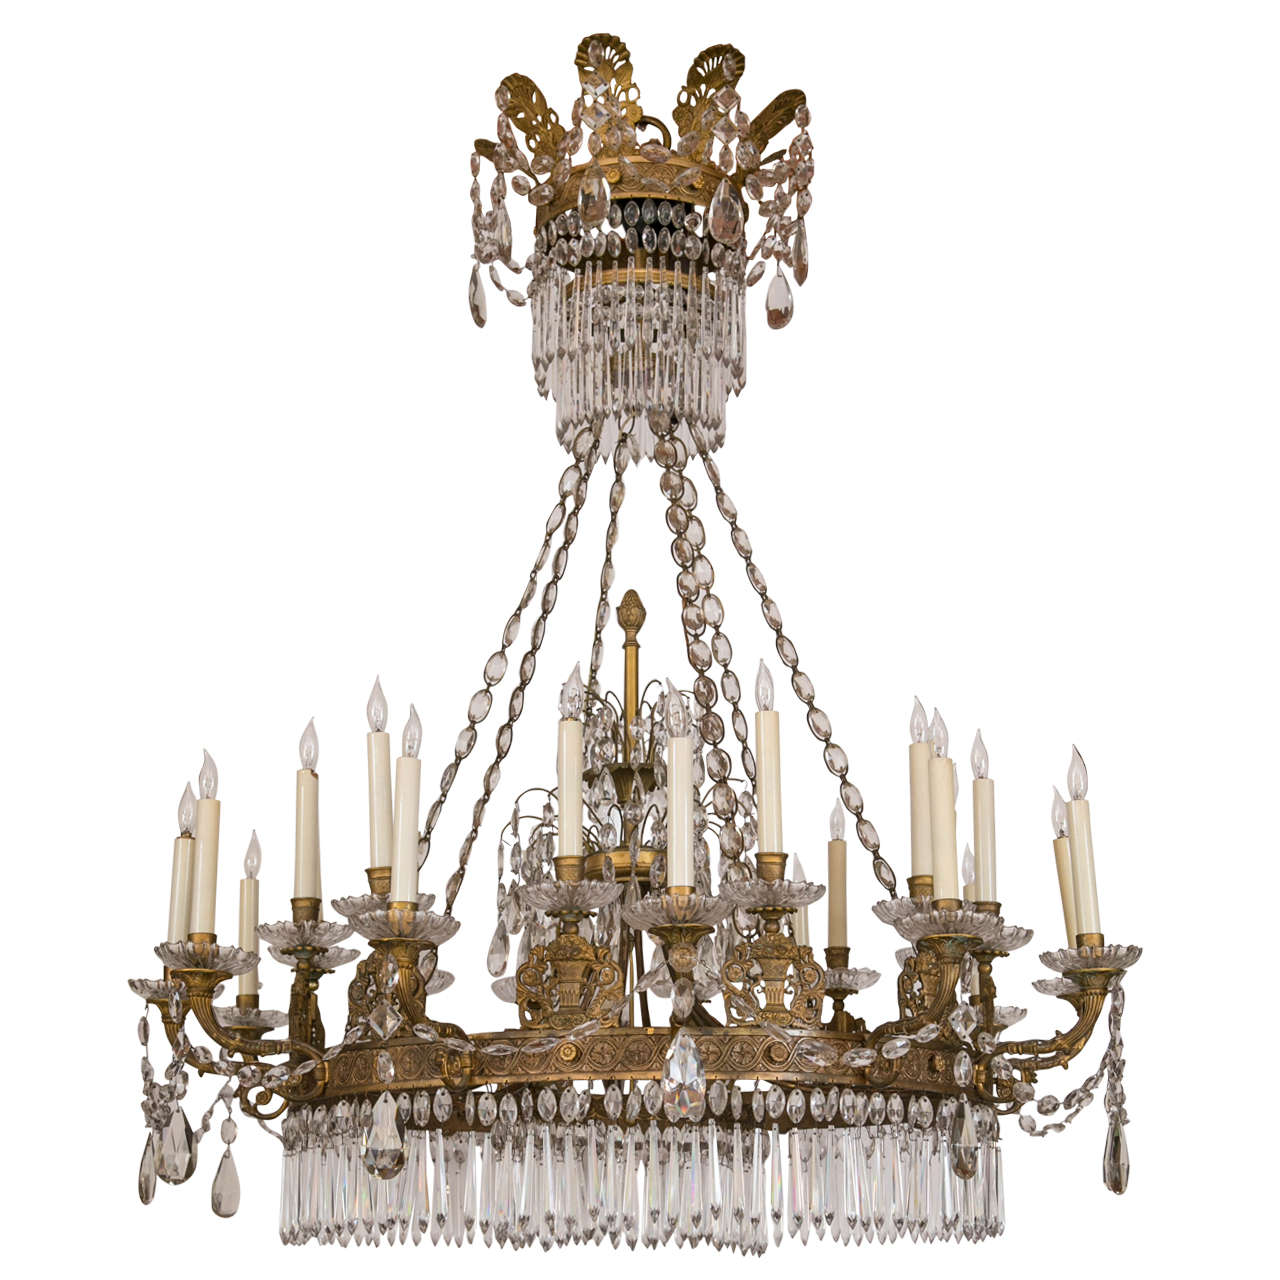 Large Russian Empire Doré Bronze and Crystal 24-Light Chandelier, circa 1880